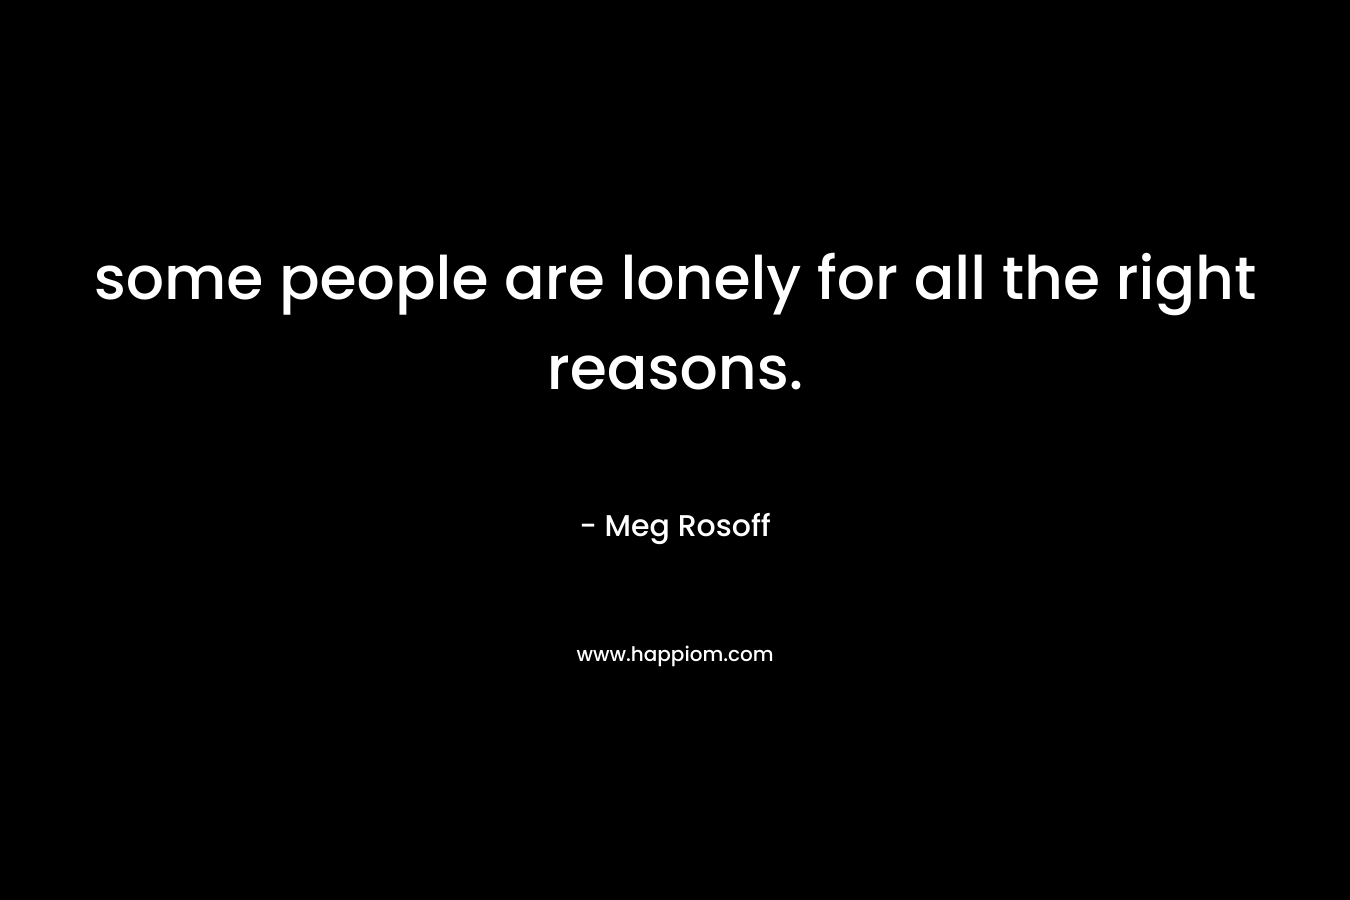 some people are lonely for all the right reasons.